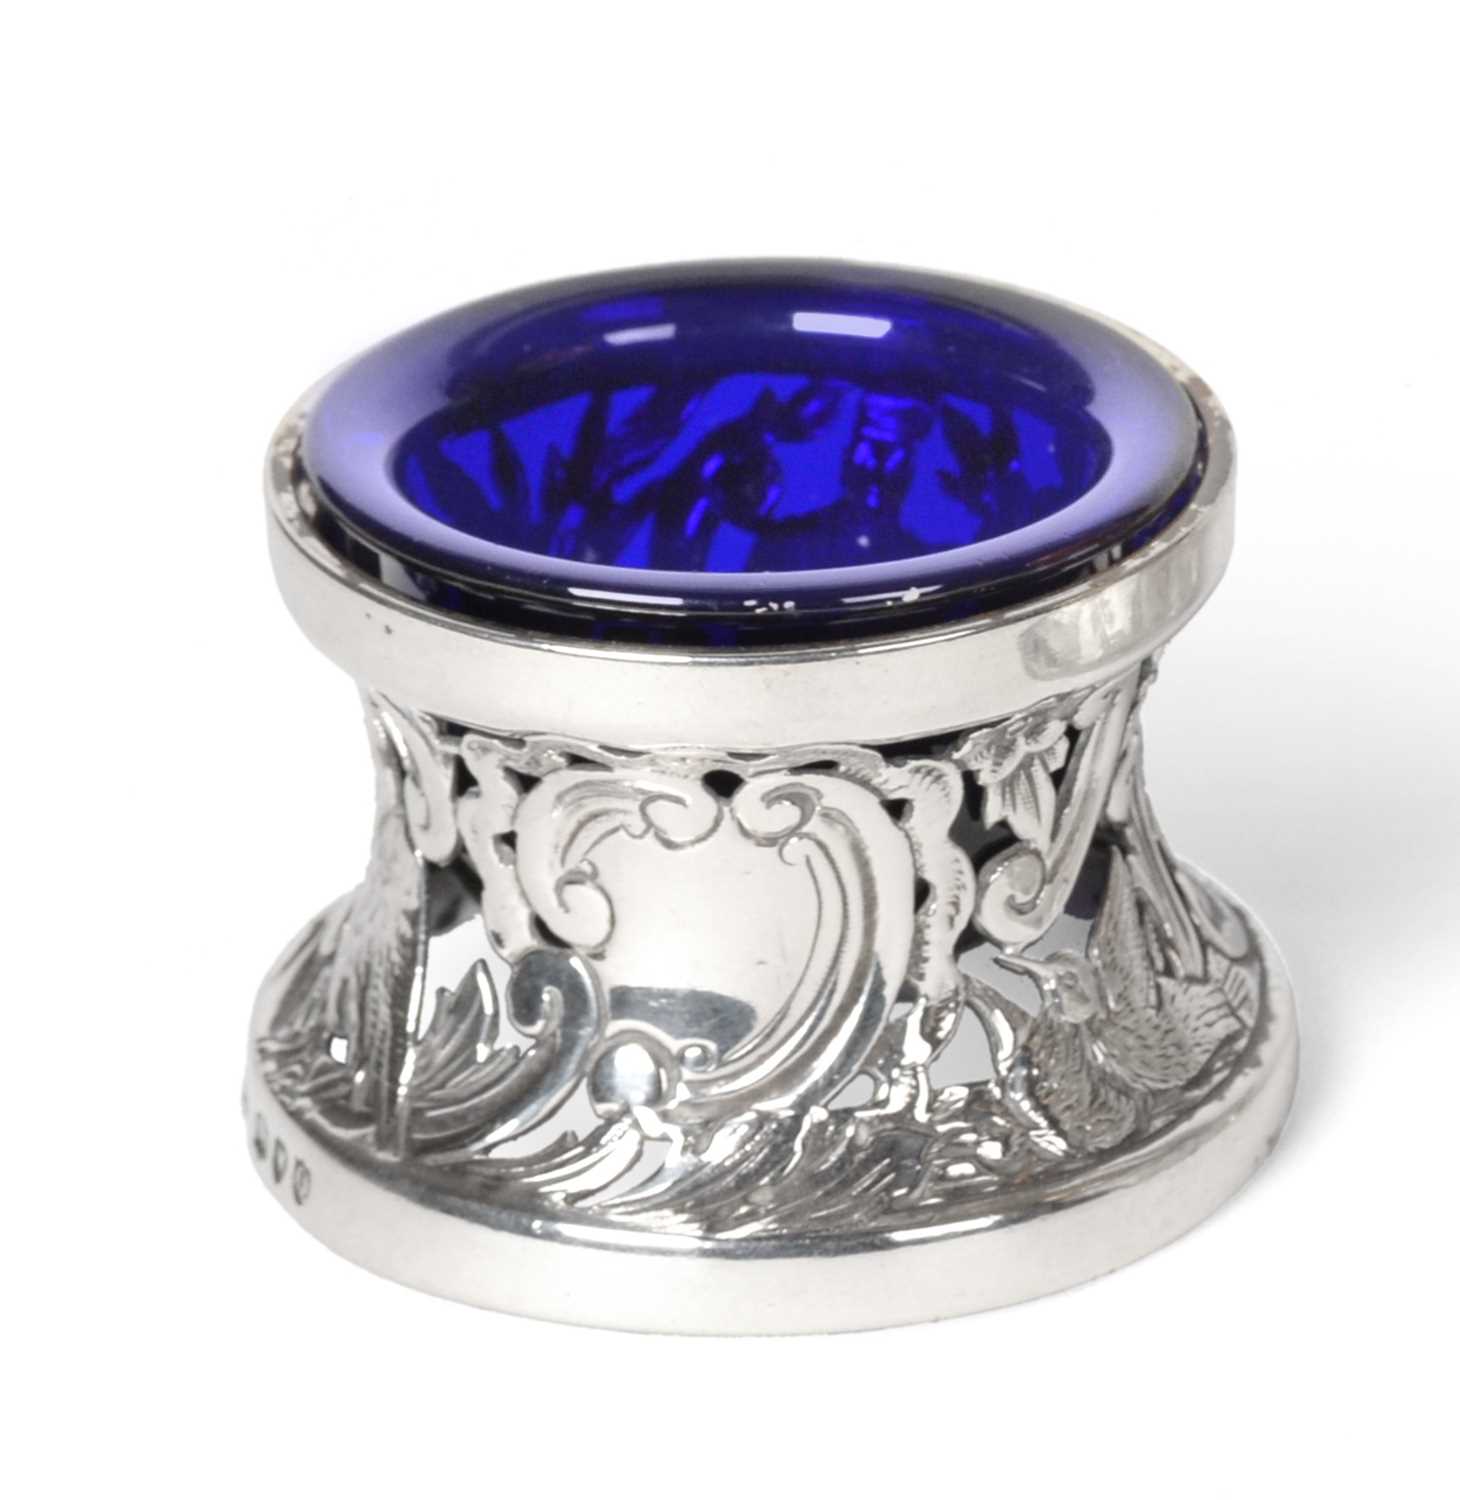 A Victorian Silver Salt-Cellar, by John Aldwinckle and Thomas Slater, London 1891, in the form of an